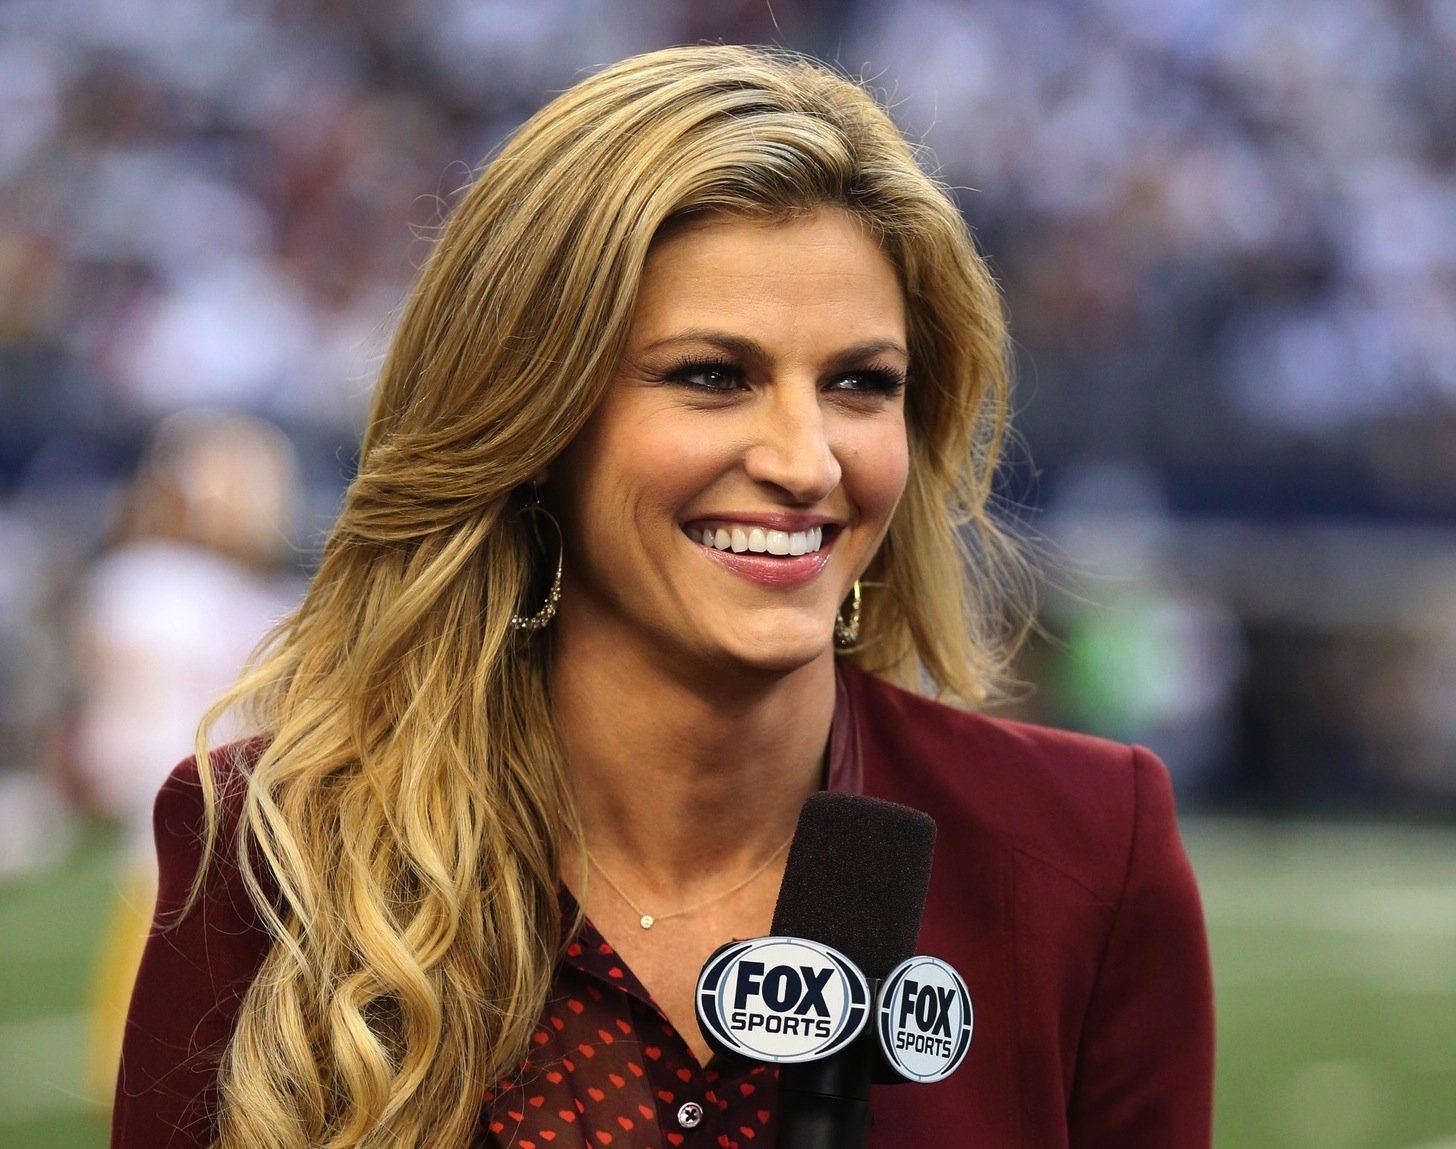 relevance. naked pictures of erin andrews sorted by. 